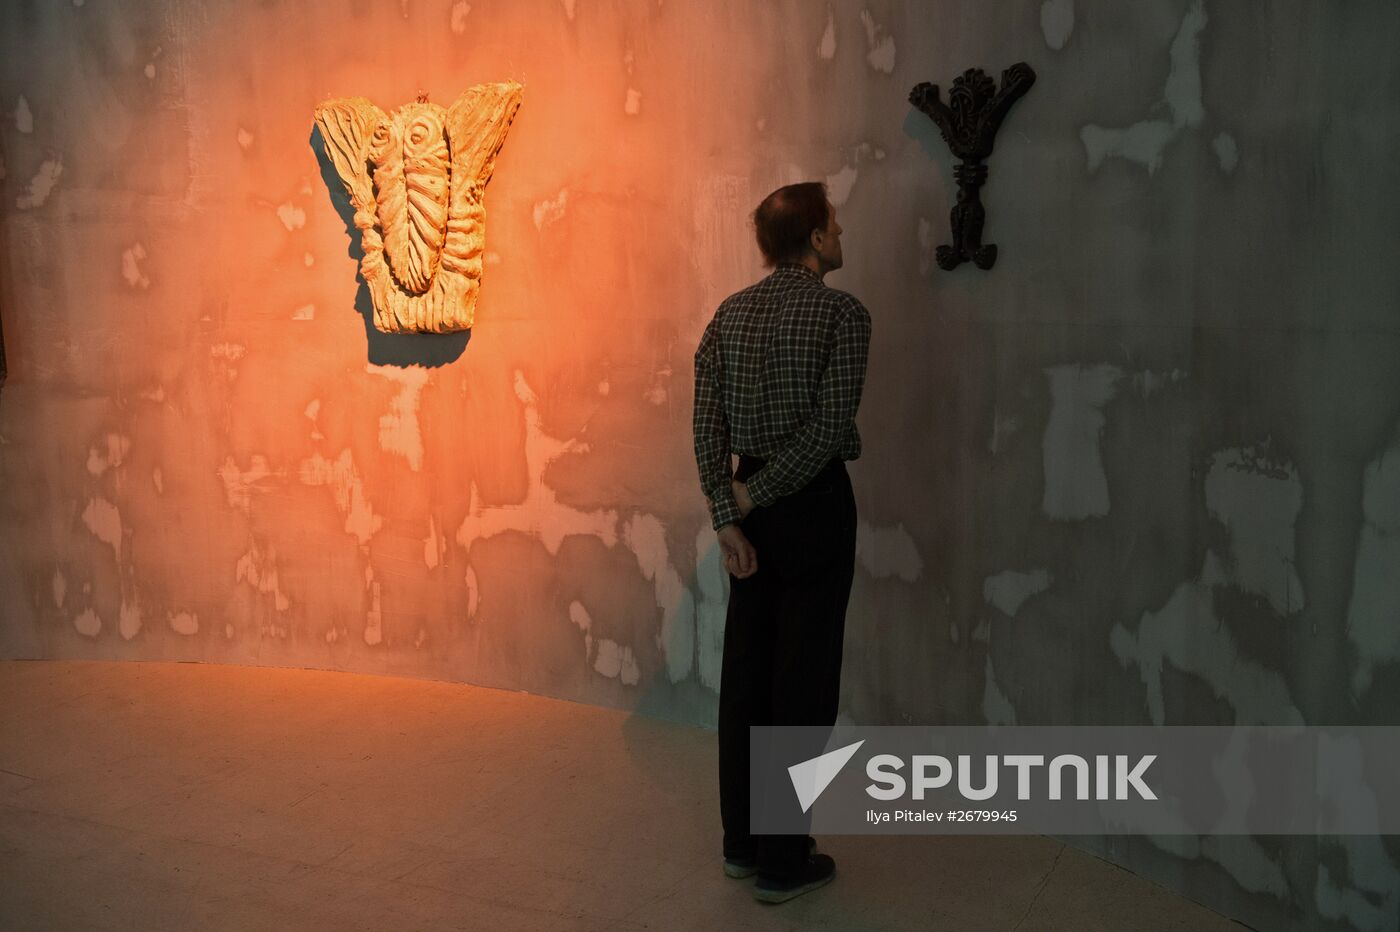 Exhibition "Sculptures We Don't See" at the Moscow Manege